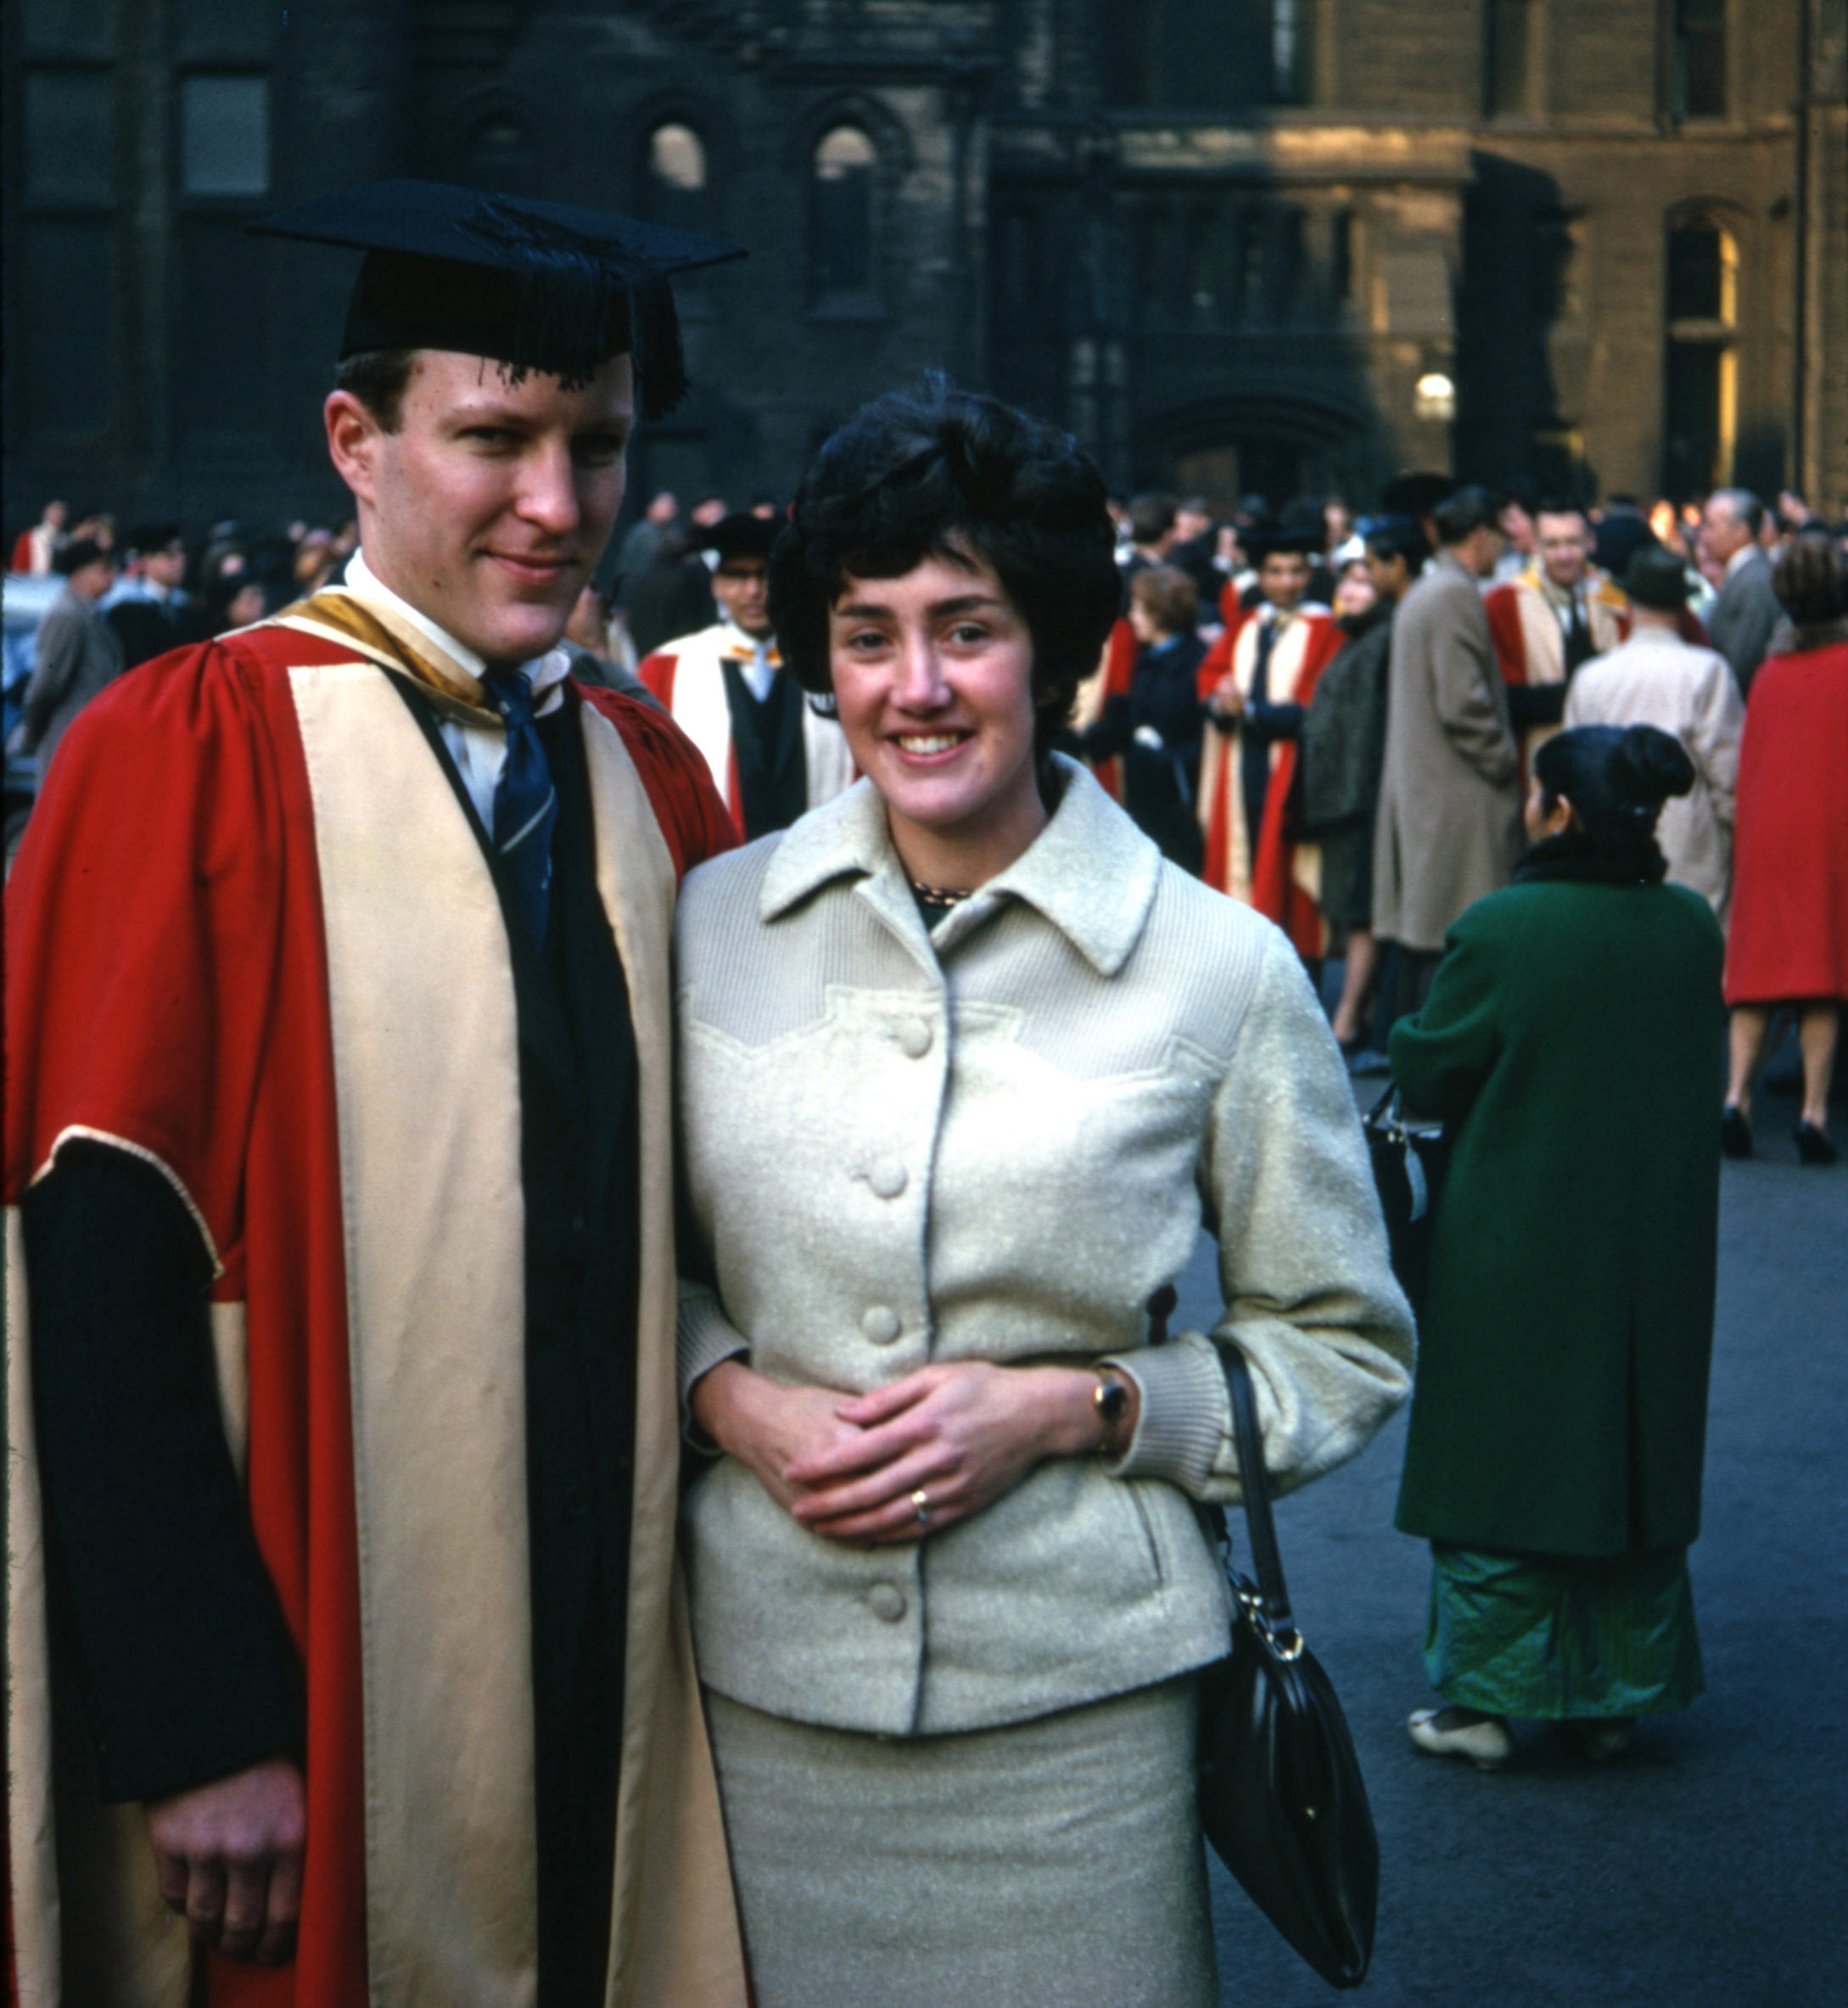 13 Dec 1963 Malcolm and Betty after the PhD degree day ceremony